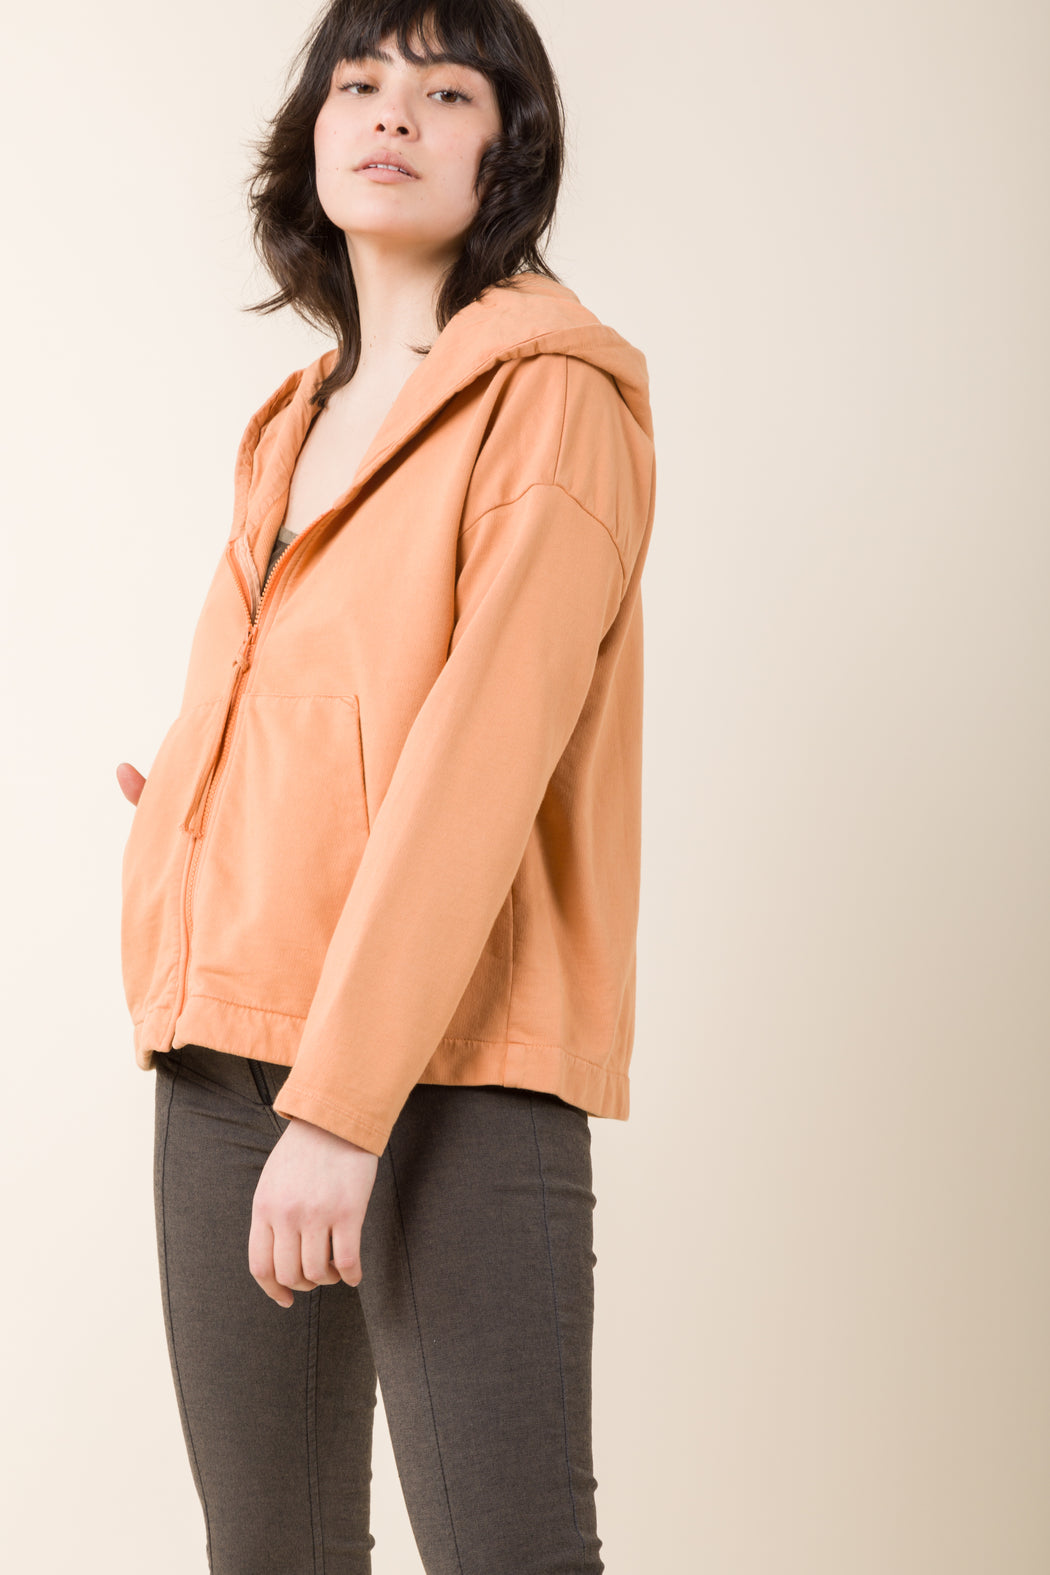 Our Square Pegs is a 100% organic cotton hoodie with a boxy fit, a zip-front, and dual patch pockets. The abbreviated length, hits just below the waist and is complete with a drop shoulder and narrow sleeves. 